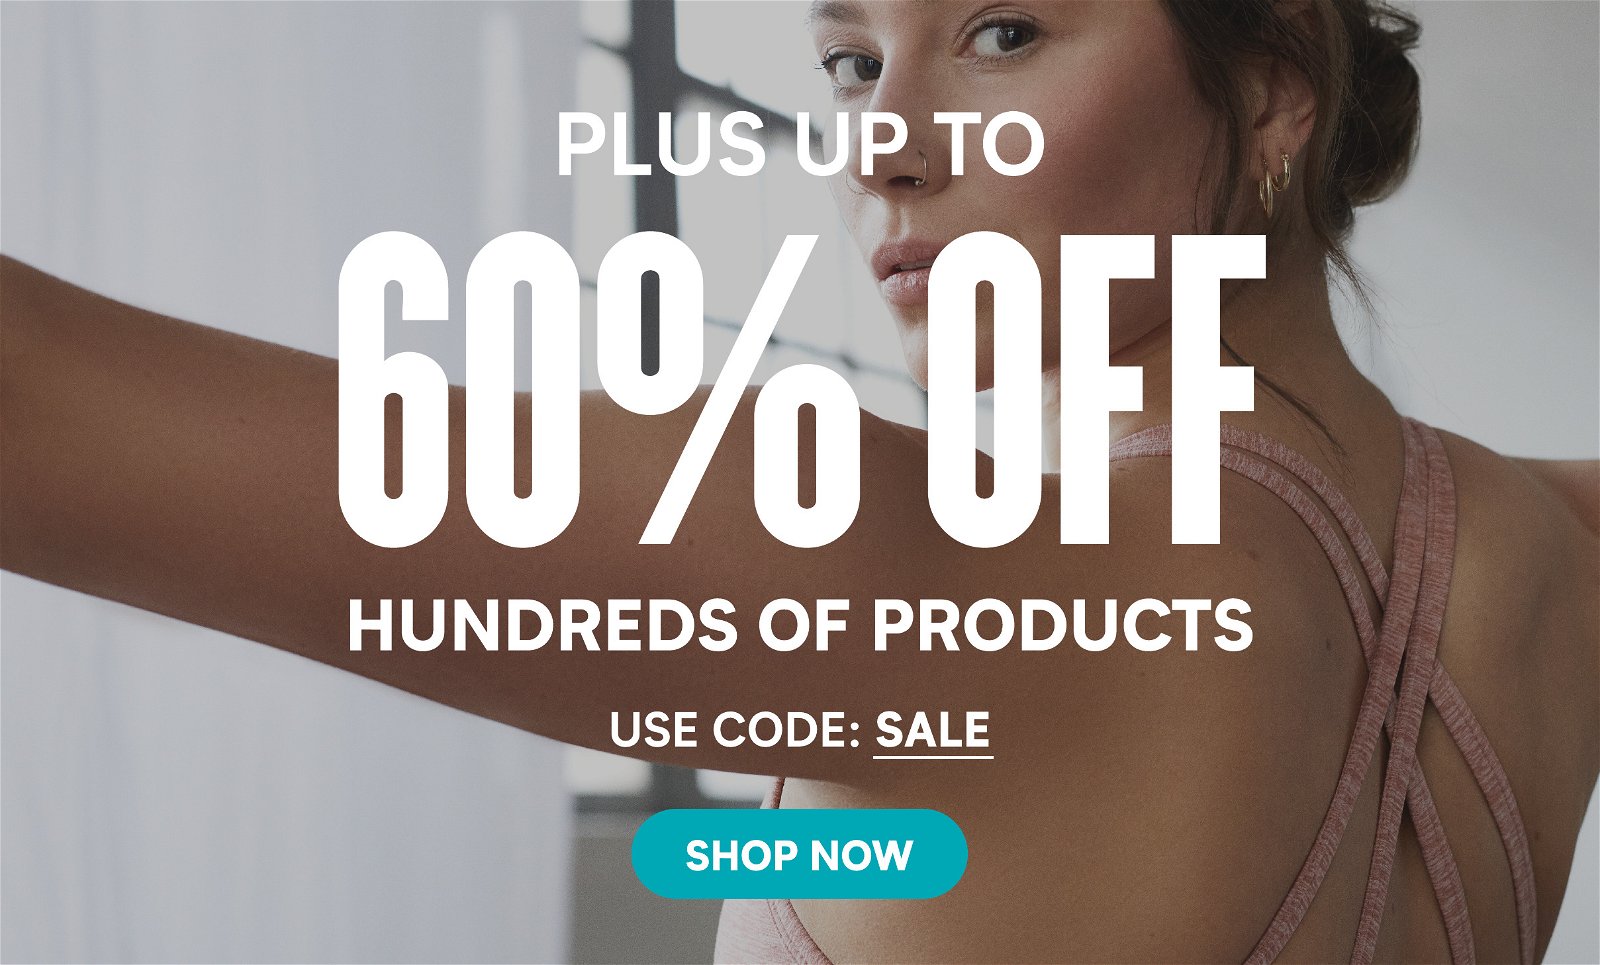 Plus up to 60% off hundreds of products